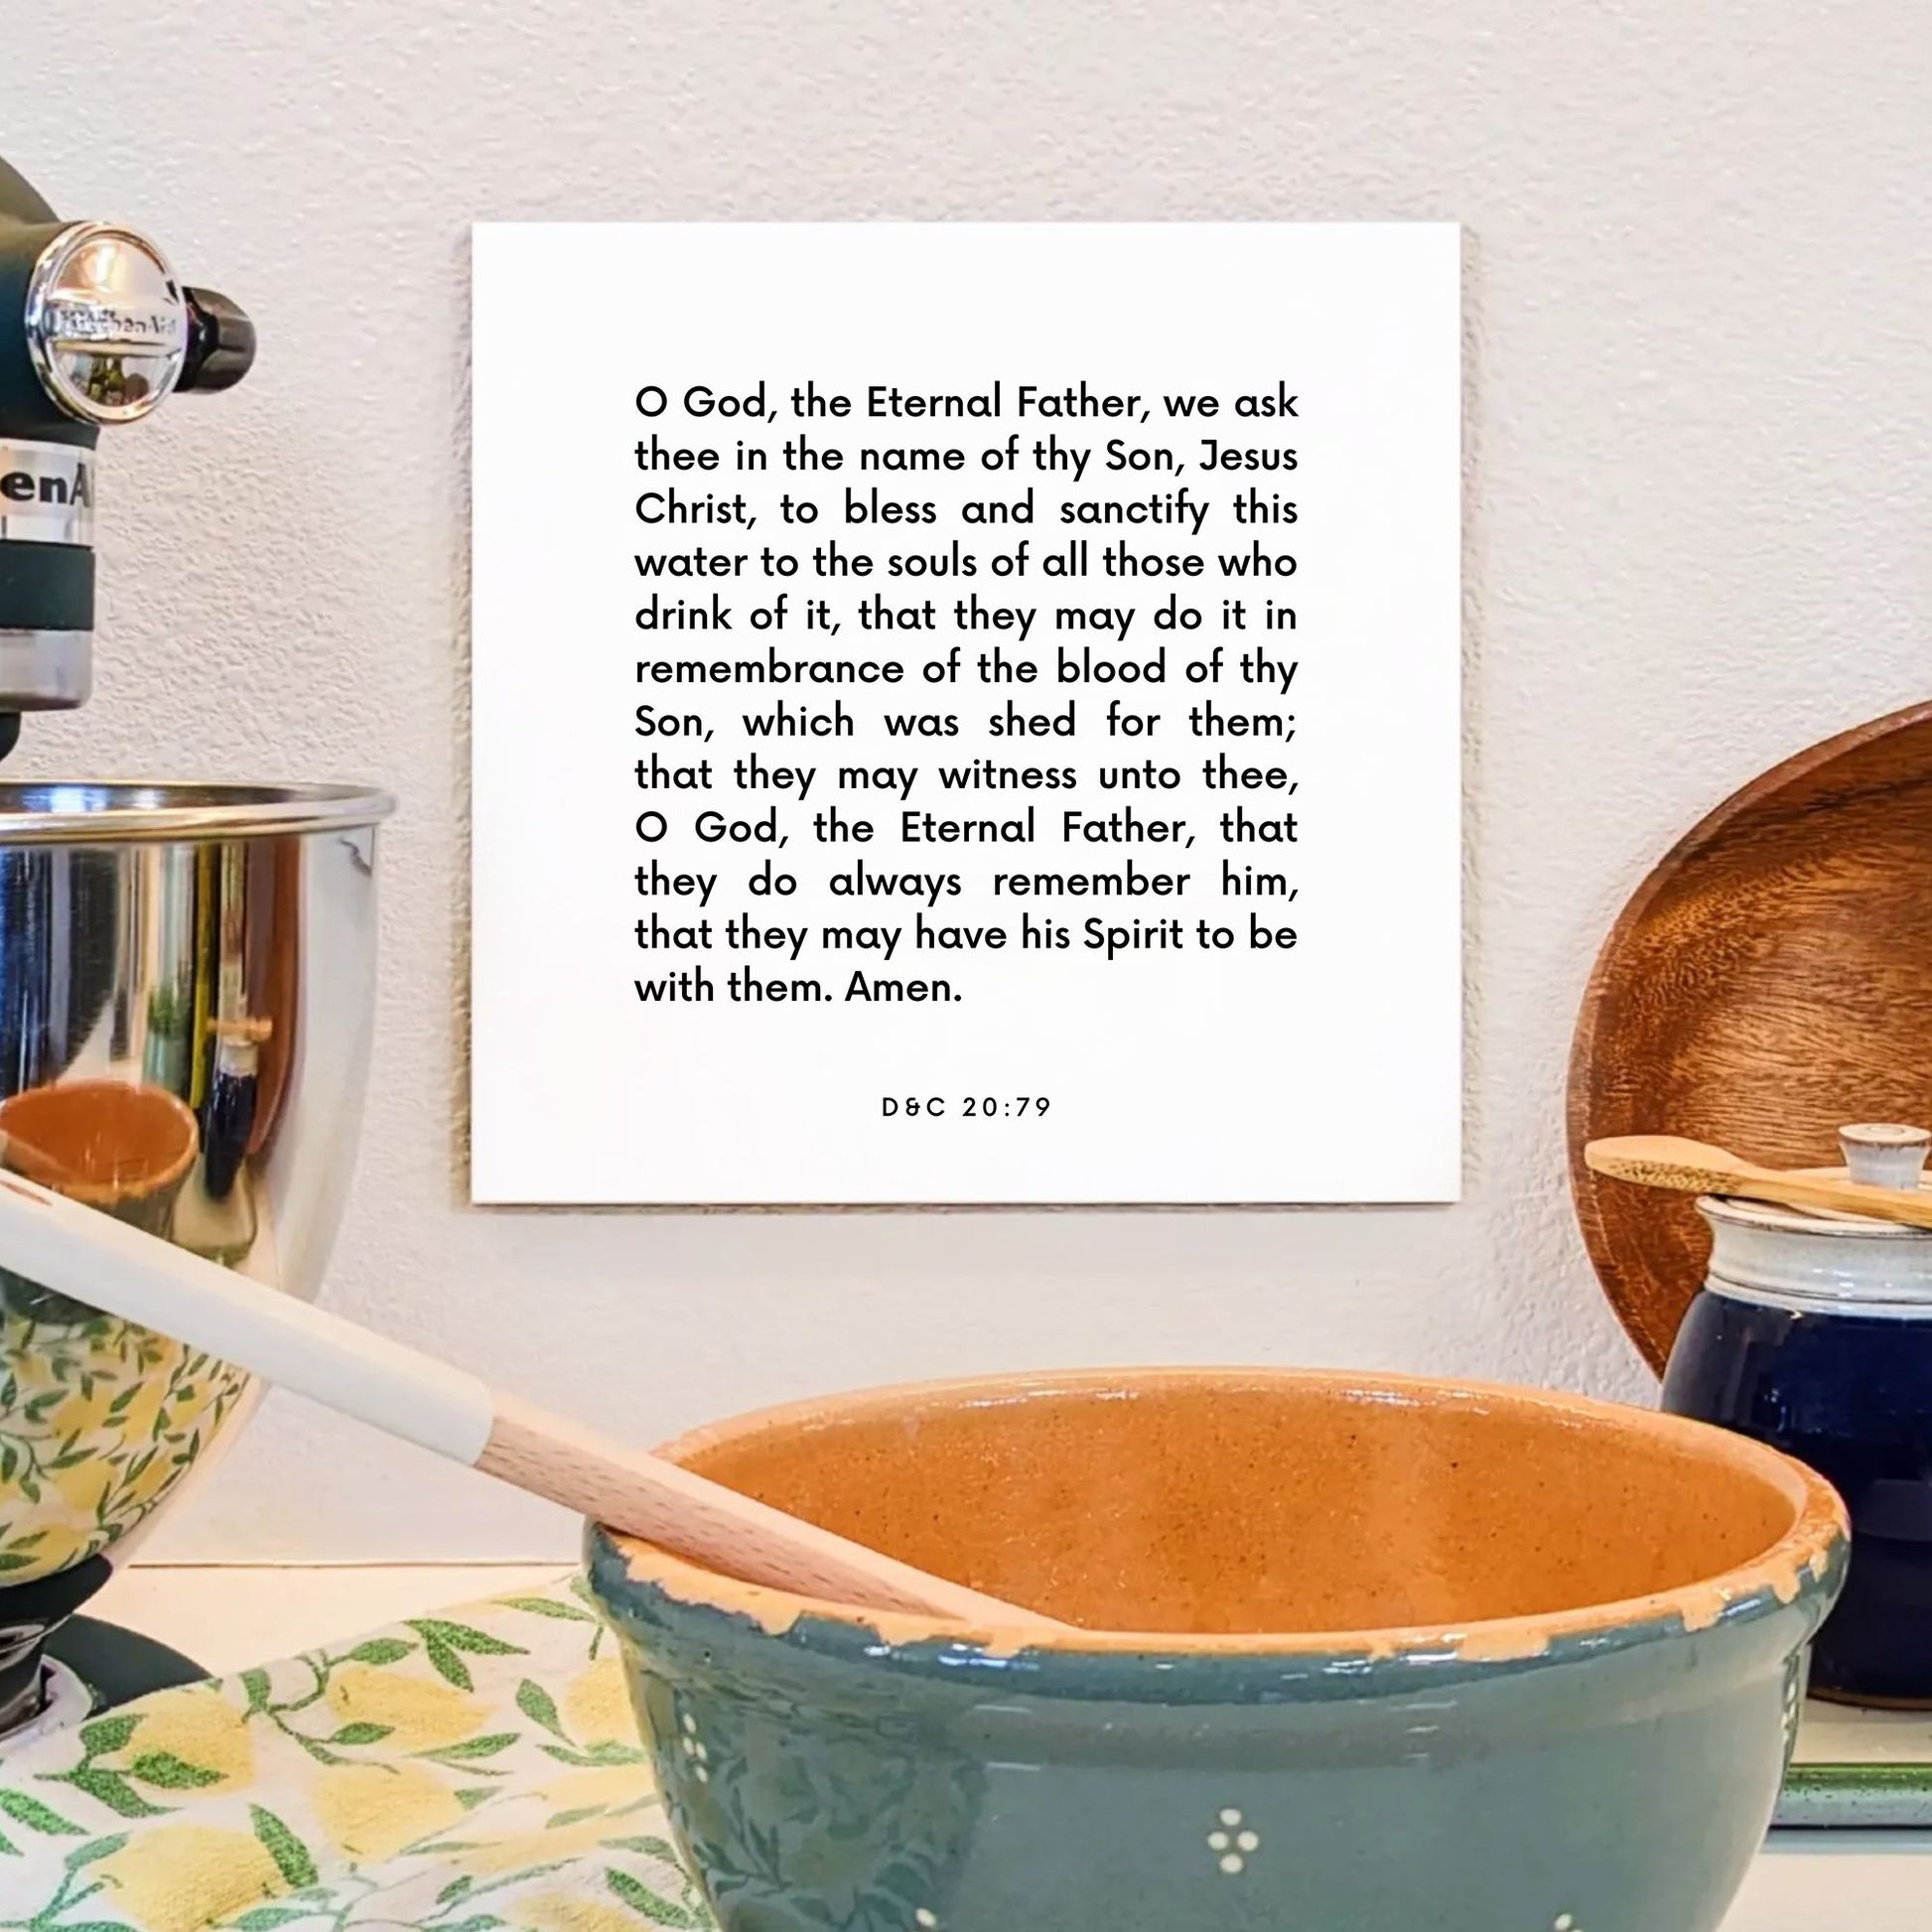 Kitchen mouting of the scripture tile for D&C 20:79 - "We ask thee to bless and sanctify this water"